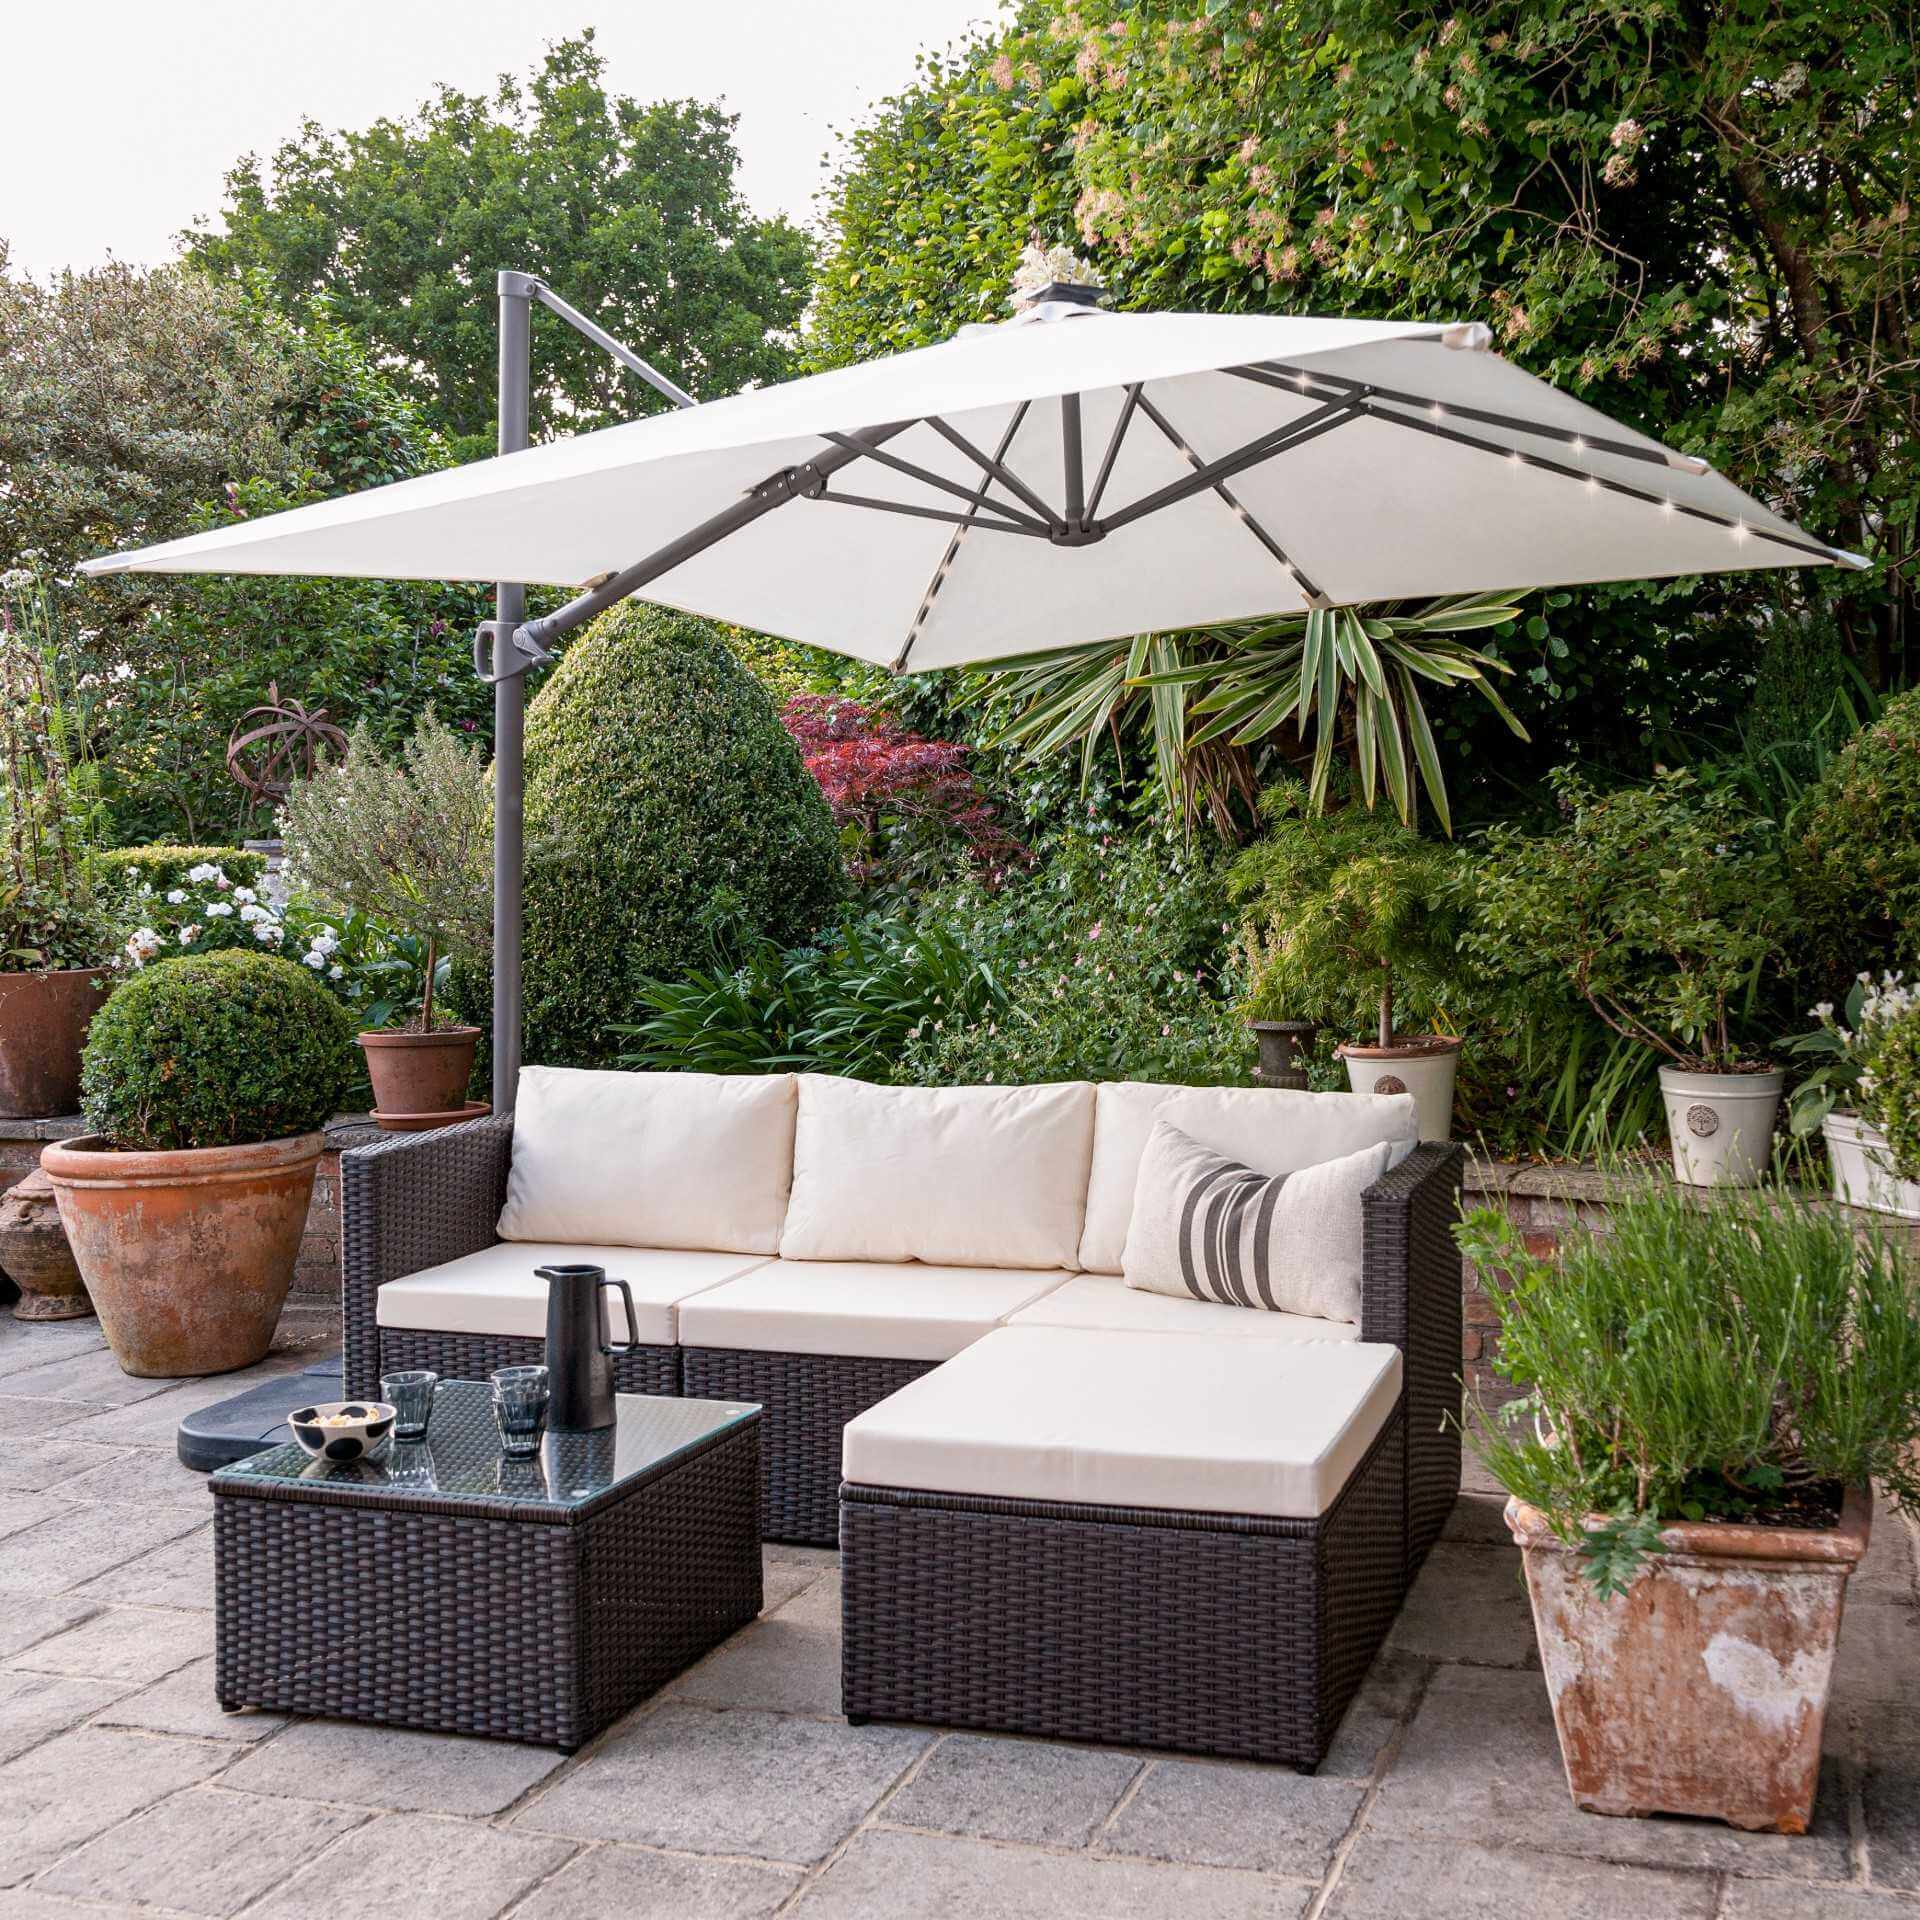 Weston 4 Seater Rattan Corner Sofa Set with LED Cantilever Parasol and Base - Brown Weave